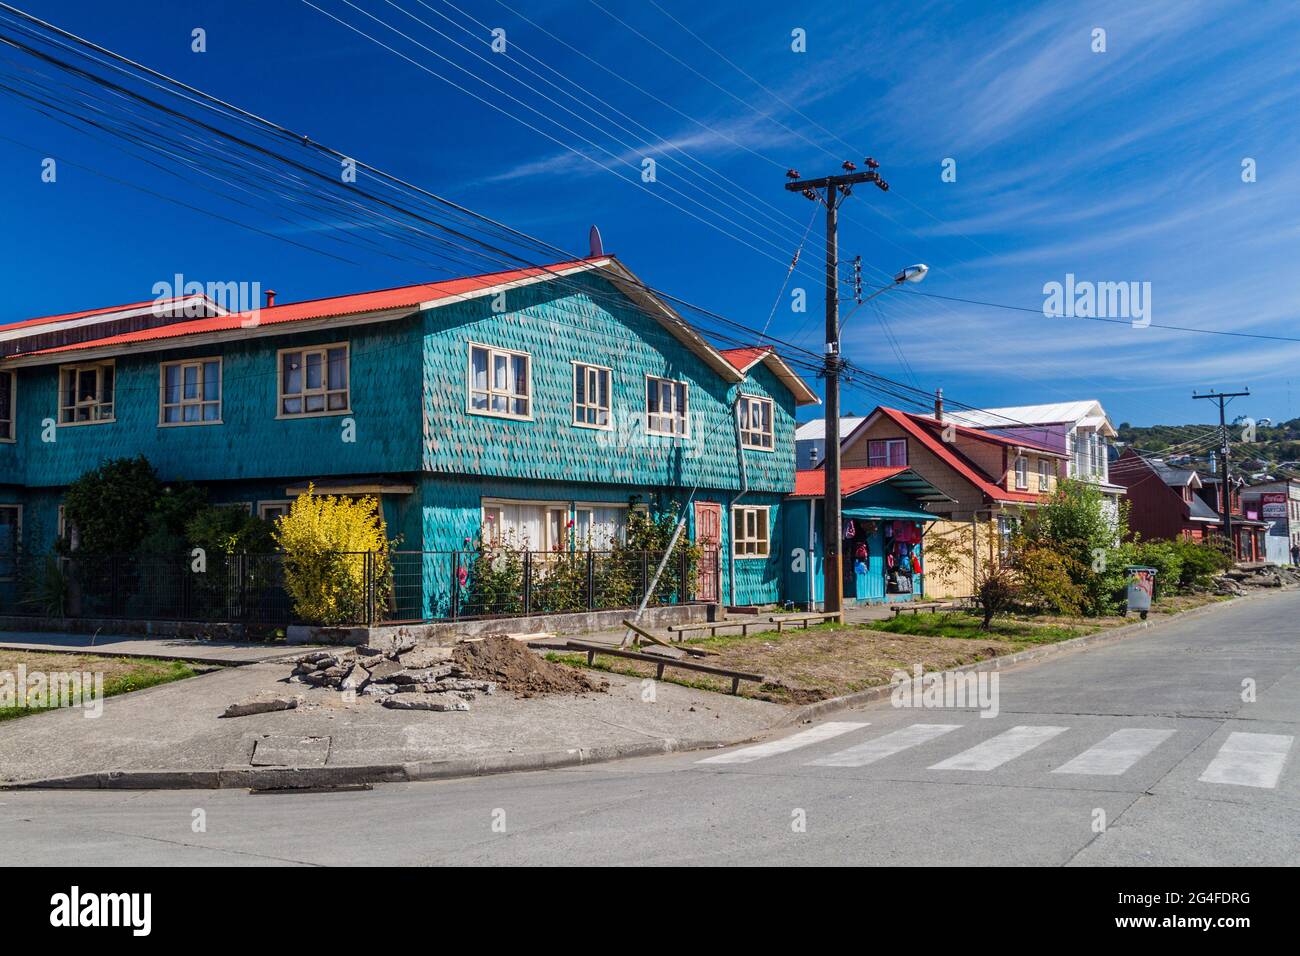 ACHAO, CHILE - MARCH 21, 2015: View of houses lining streets of Achao village, Quinchao island, Chile Stock Photo